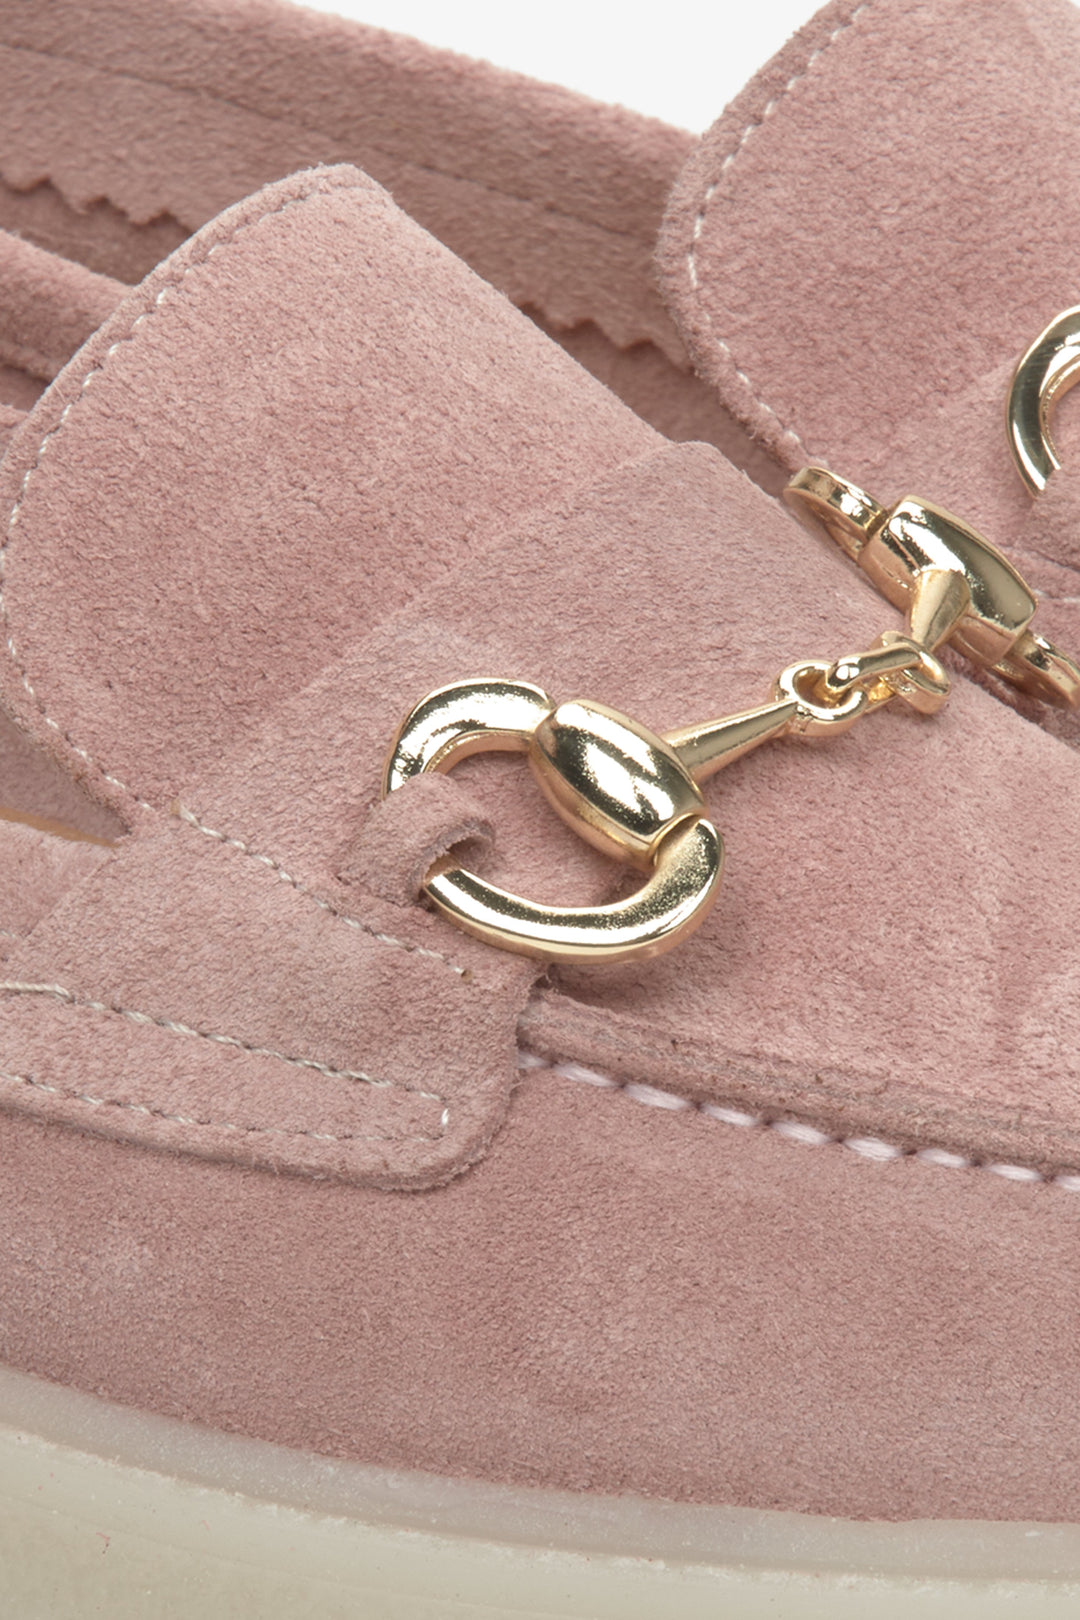 Estro light pink women's loafers with gold buckle - close up on details.